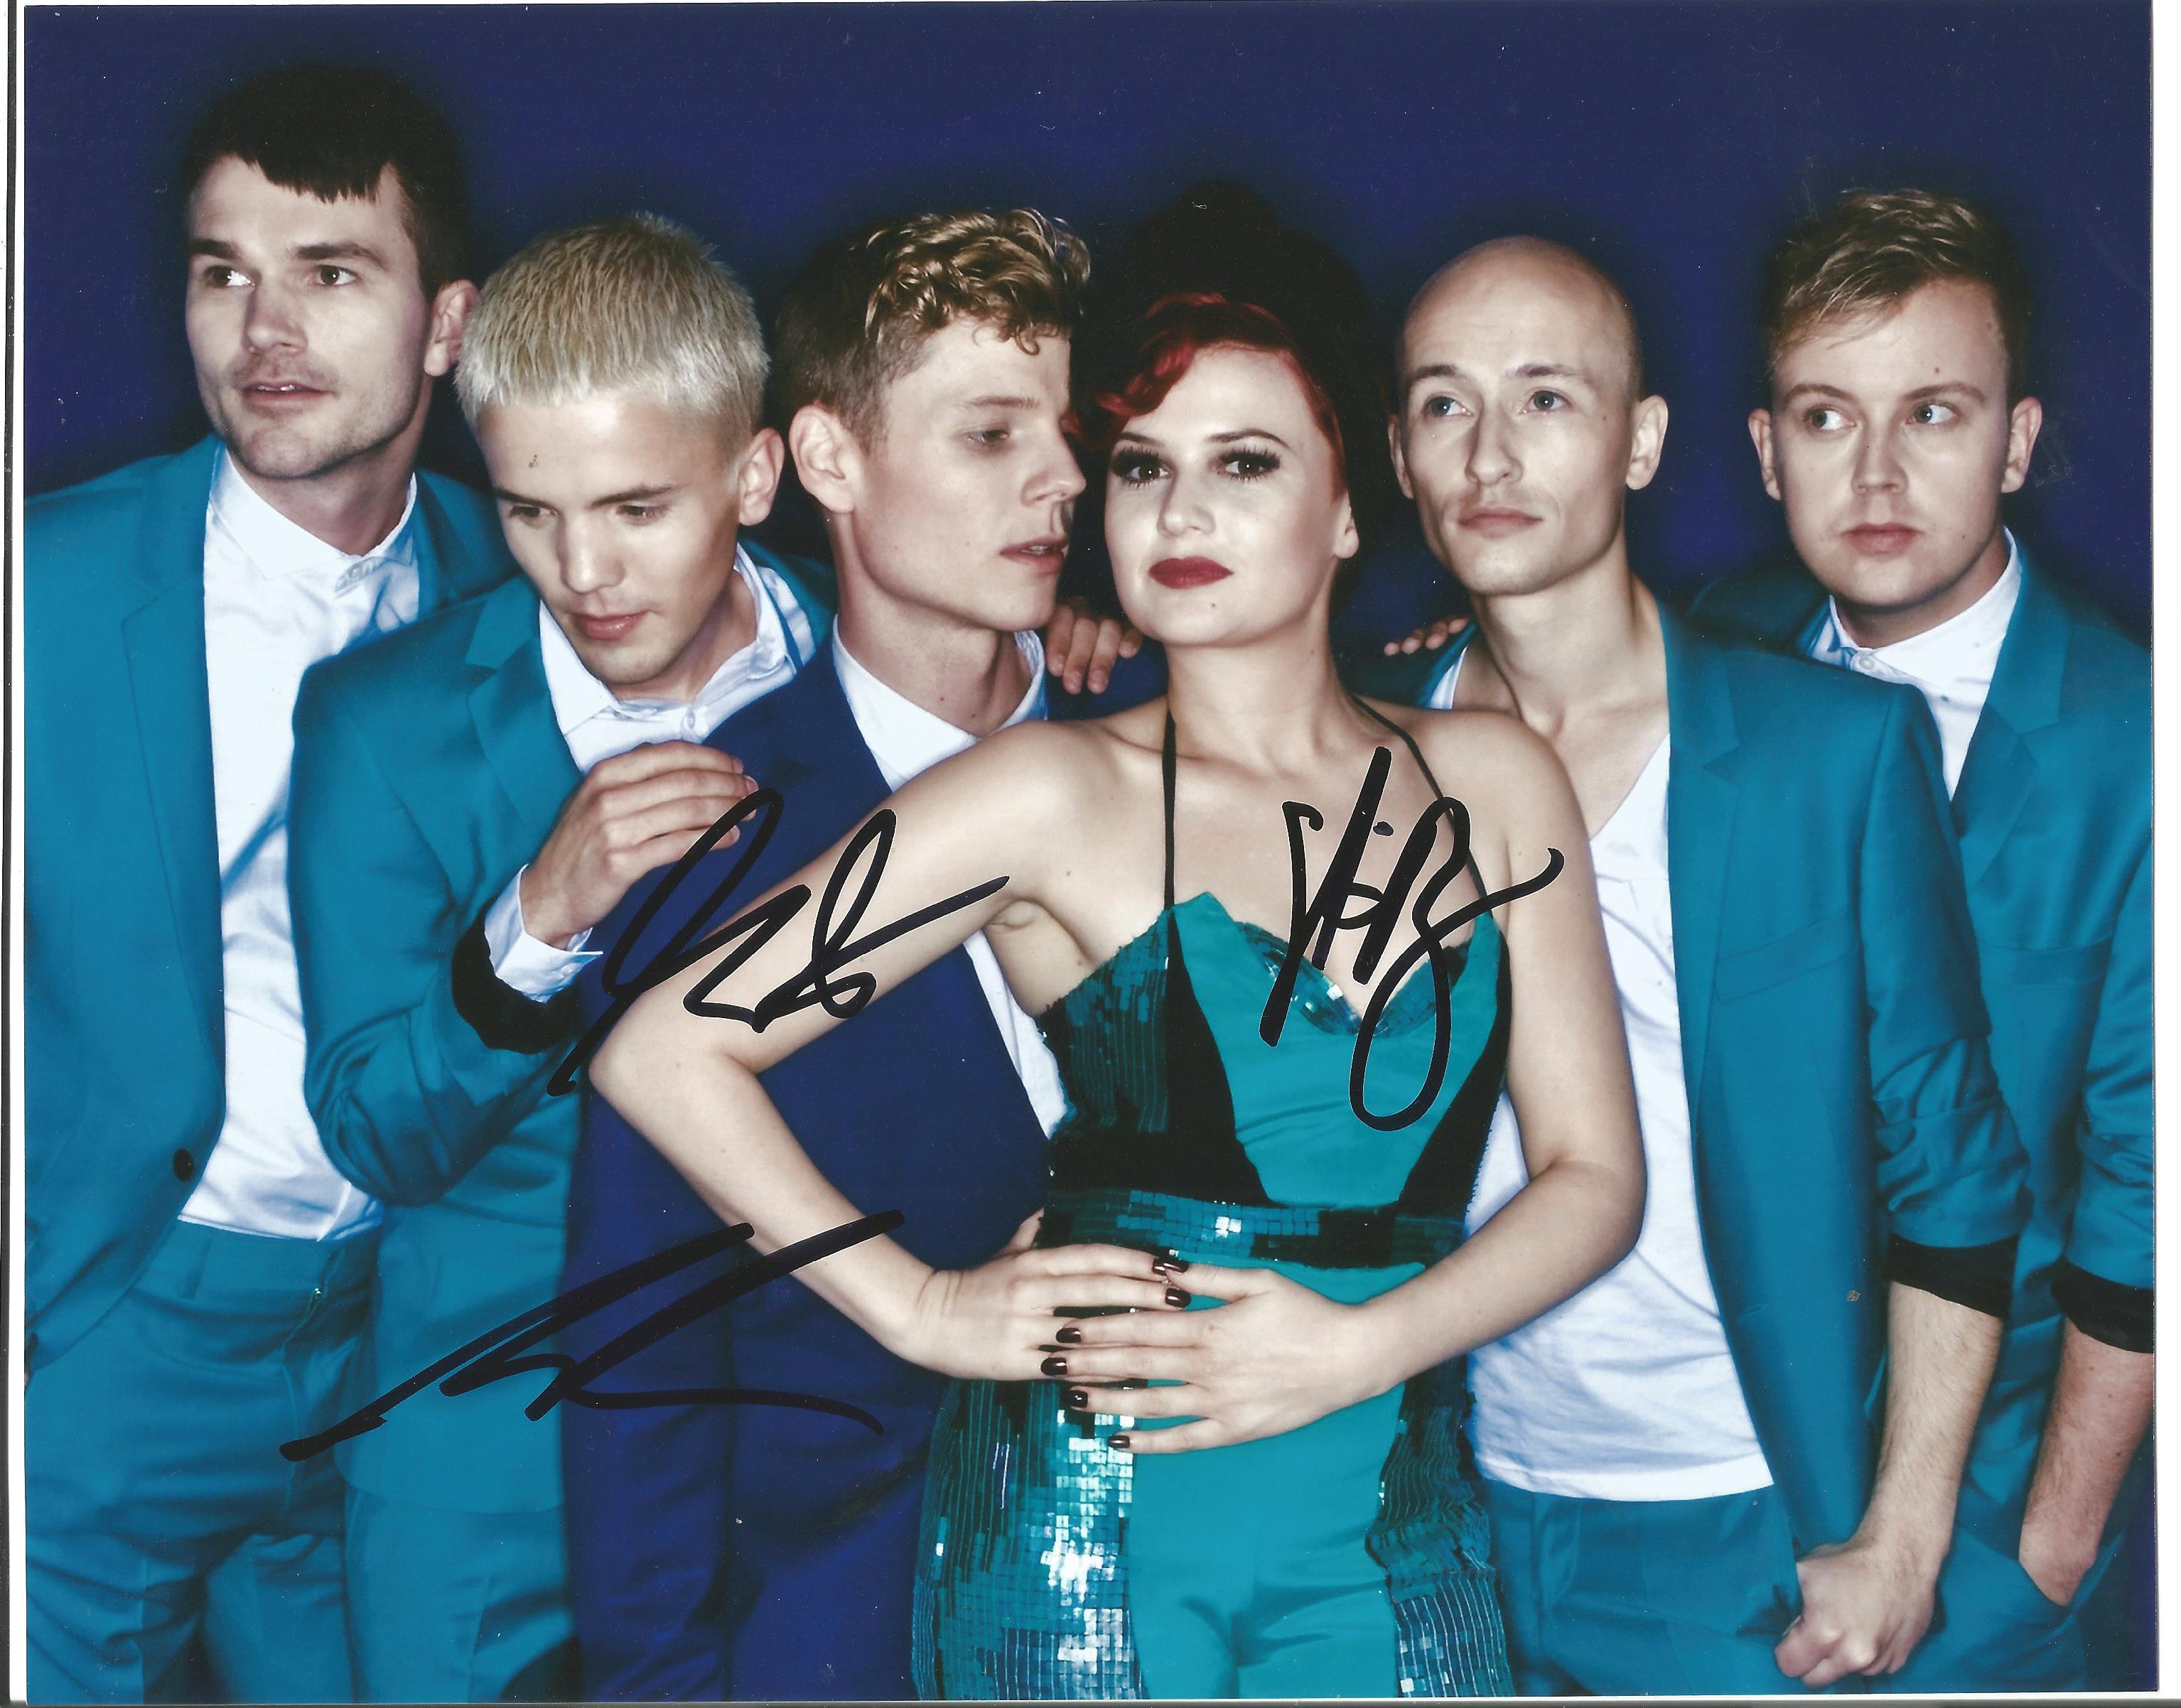 Alphabeat Music Signed 8x10 Photo. Good Condition. All autographs are genuine hand signed and come